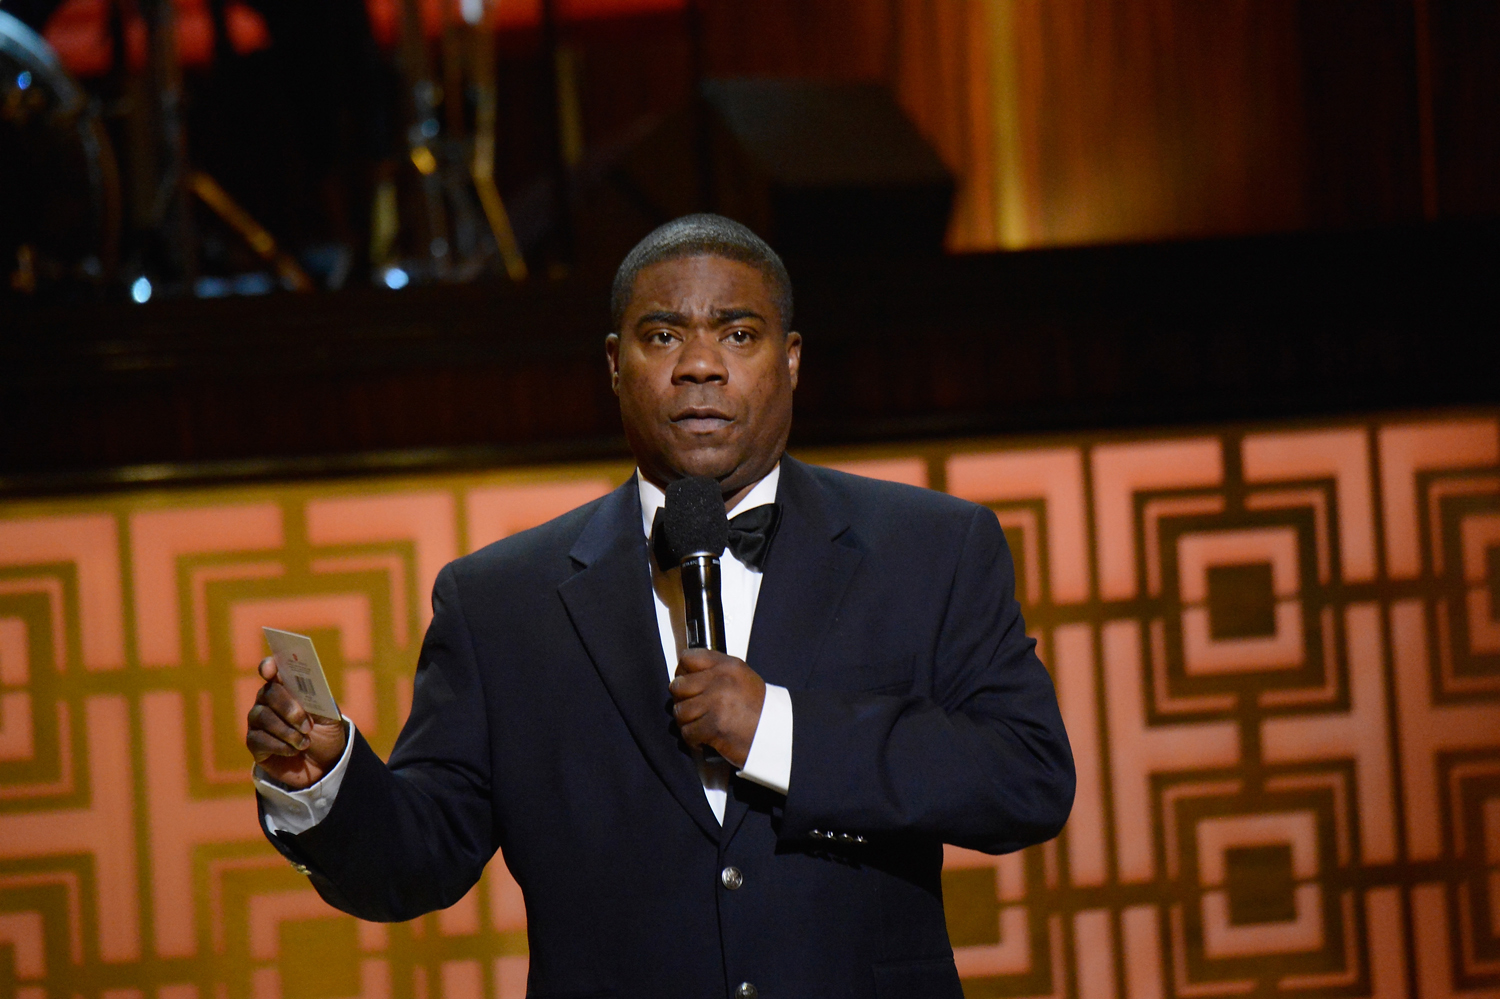 Tracy Morgan speaks onstage at Spike TV's "Don Rickles: One Night Only" on May 6, 2014 in New York. (Kevin Mazur—Getty Images for Spike TV)